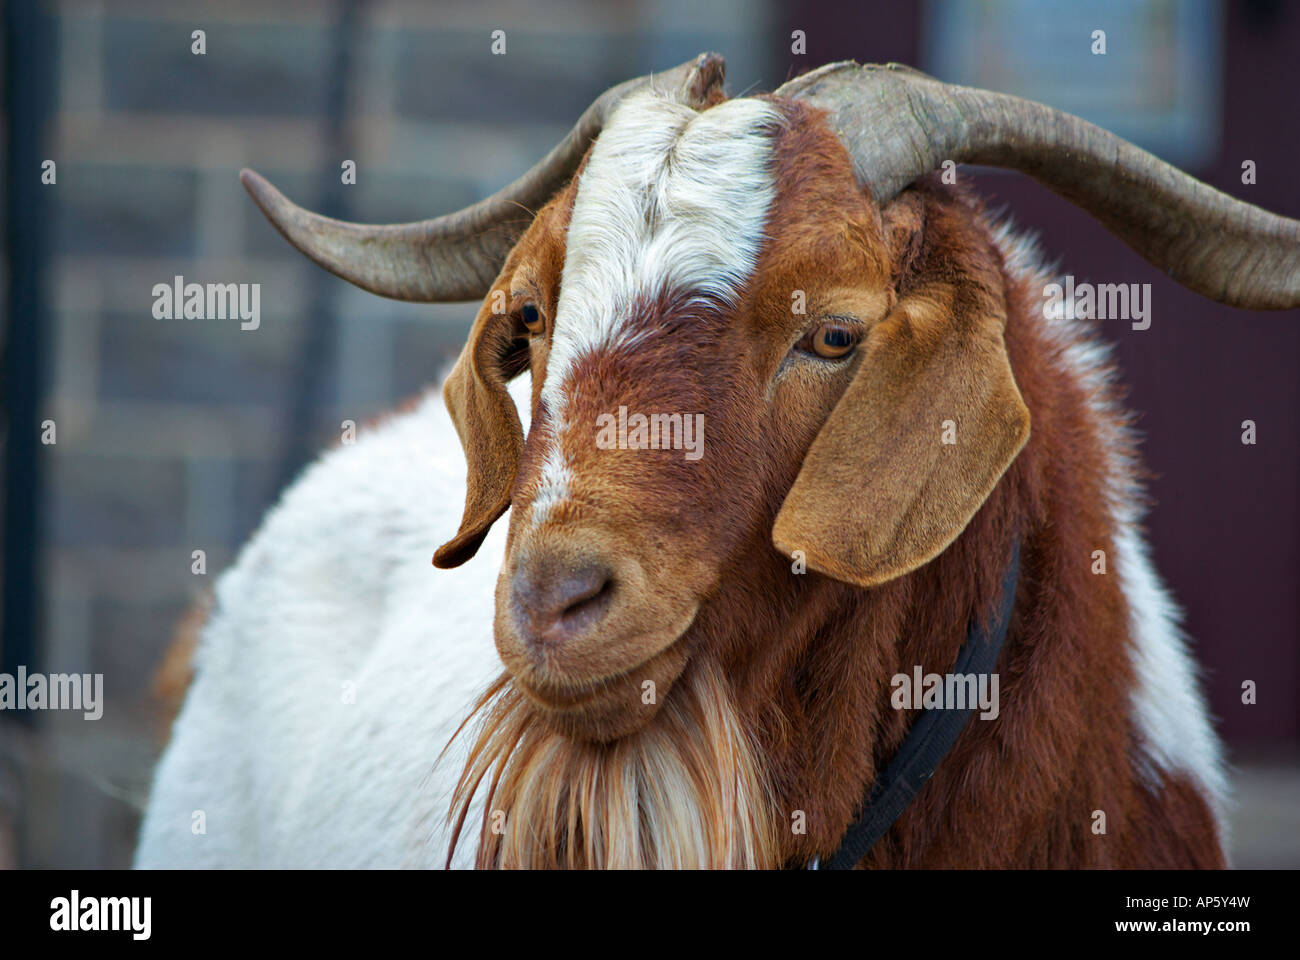 close up of an unfriendly big horned goat Stock Photo